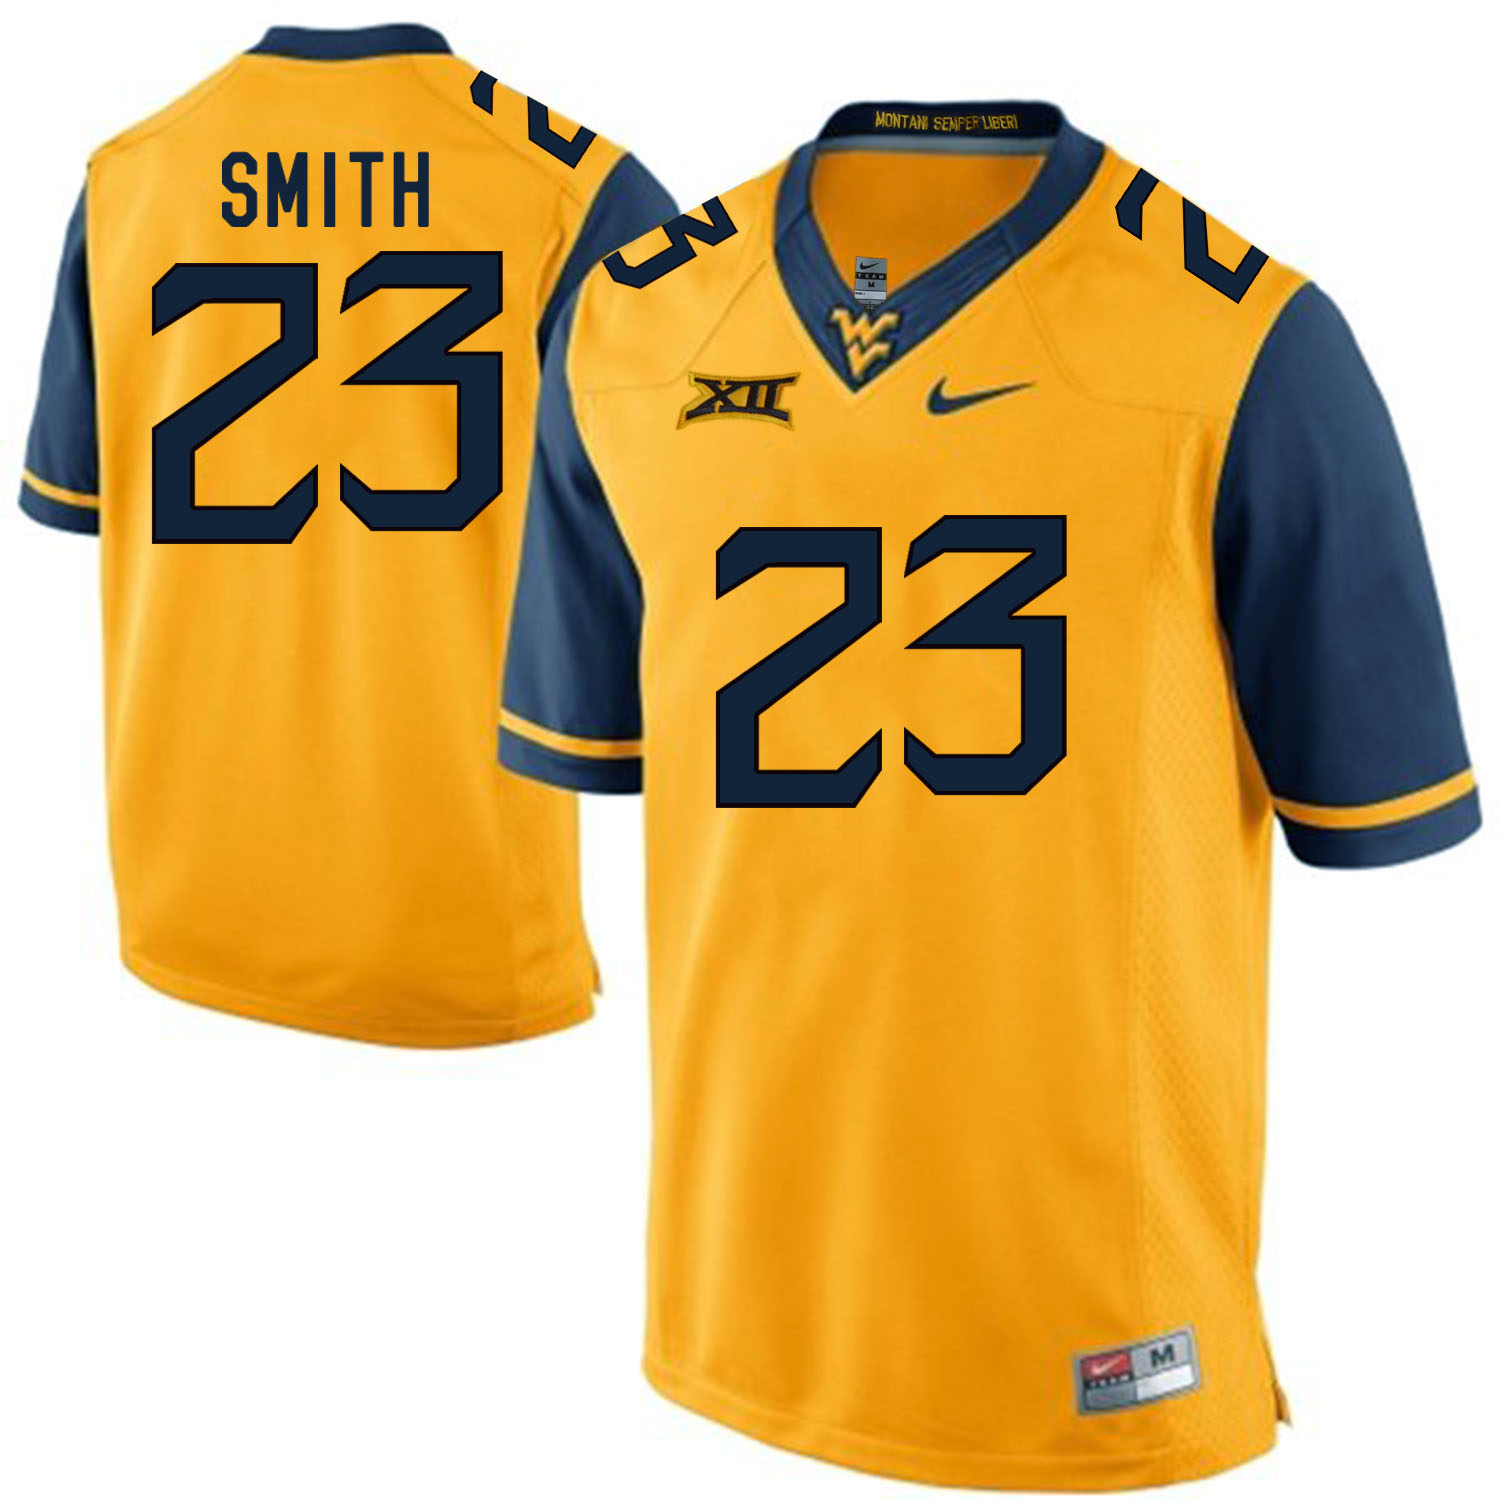 West Virginia Mountaineers 23 Geno Smith Gold College Football Jersey